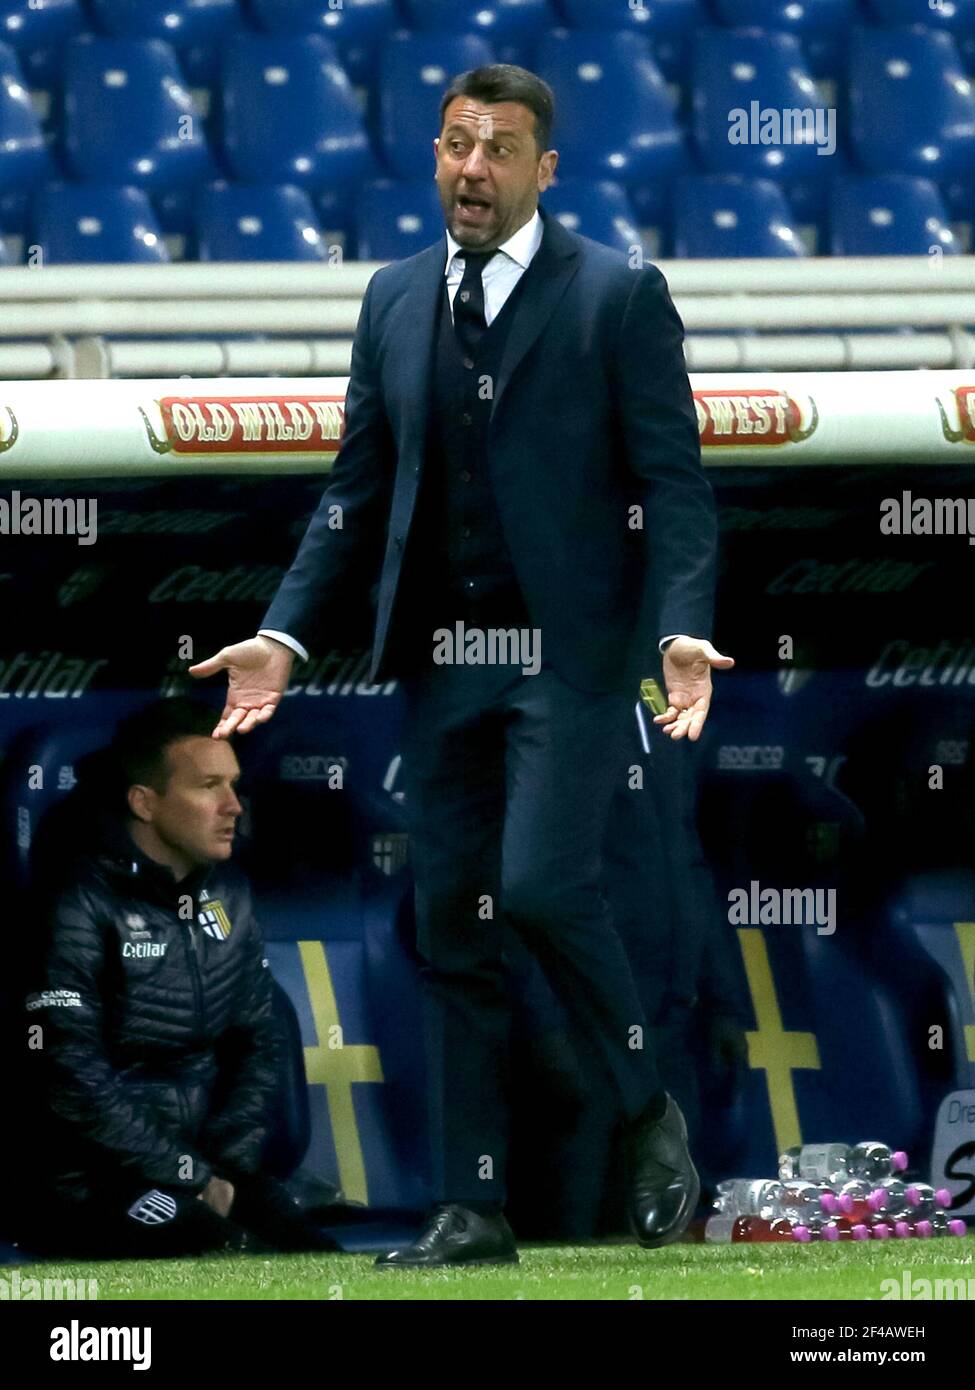 PARMA, ITALY - MARCH 19: coach Roberto D Aversa of Parma Calcio during the Serie A match between Parma Calcio and Genoa CFC at Stadio Ennio Tardini on March 19, 2021 in Parma, Italy (Photo by Ciro Santangelo/Orange Pictures) Stock Photo